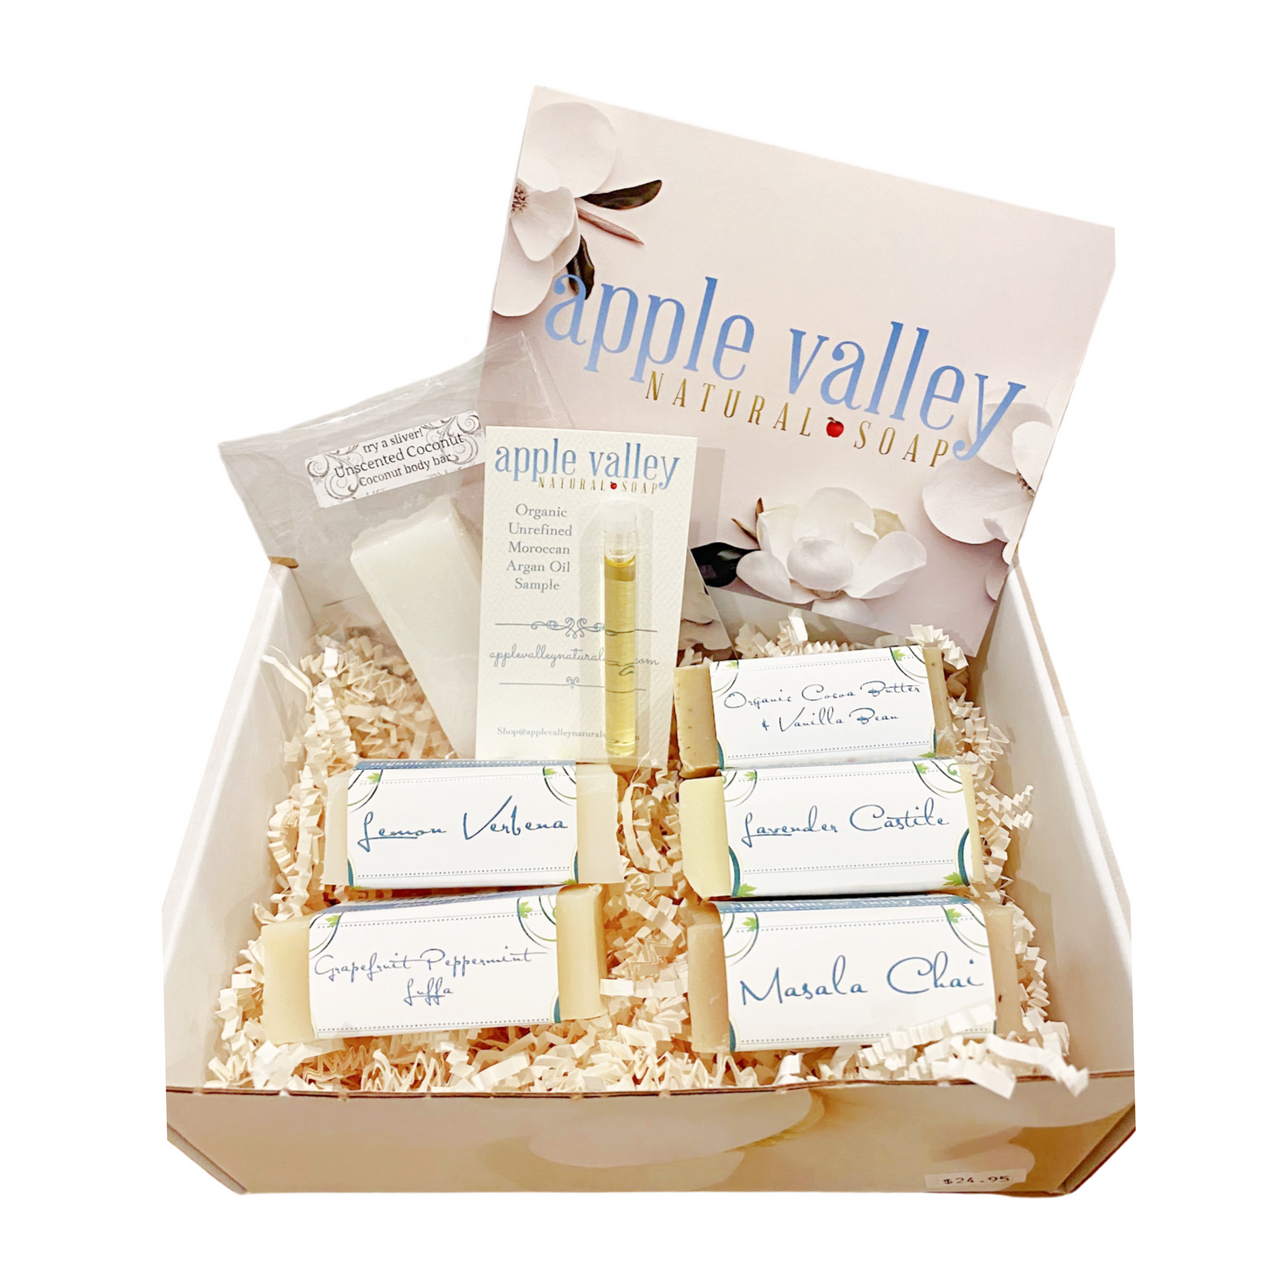 Gift product samples